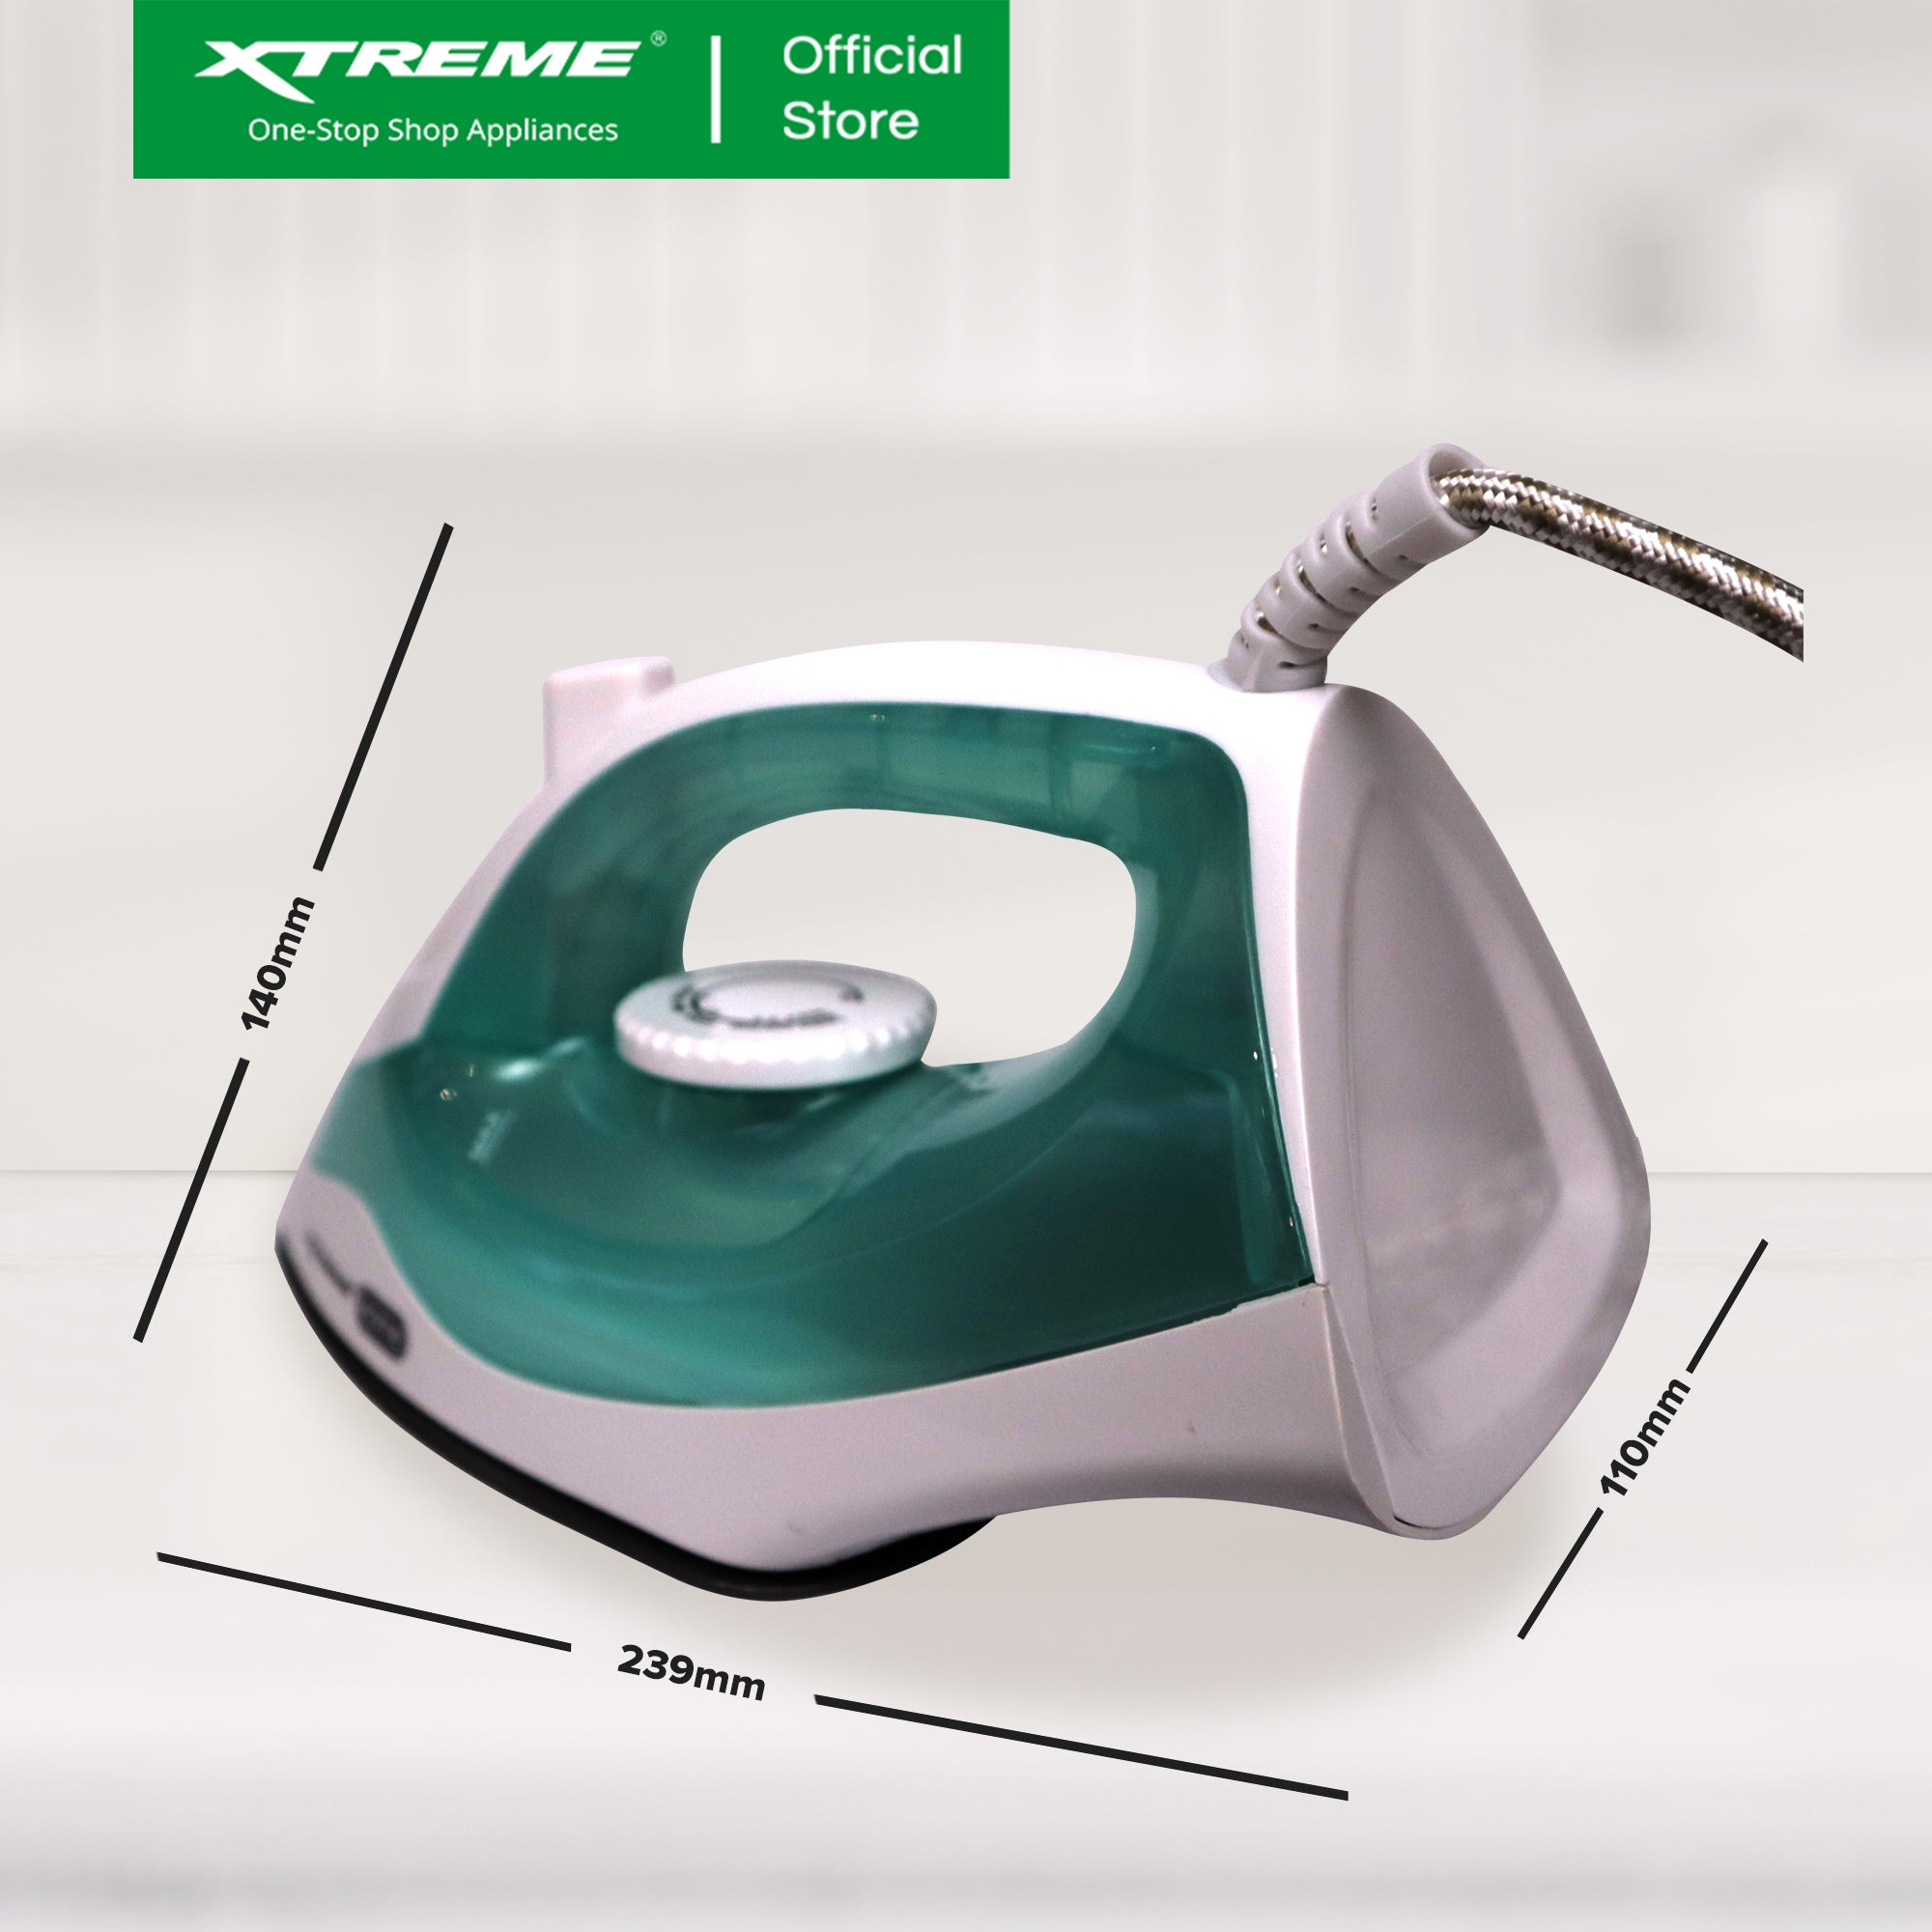 XTREME HOME Dry Iron with Spray Ceramic Soleplate and Indicator Light (Green) | XH-IRONSPRAYGREEN